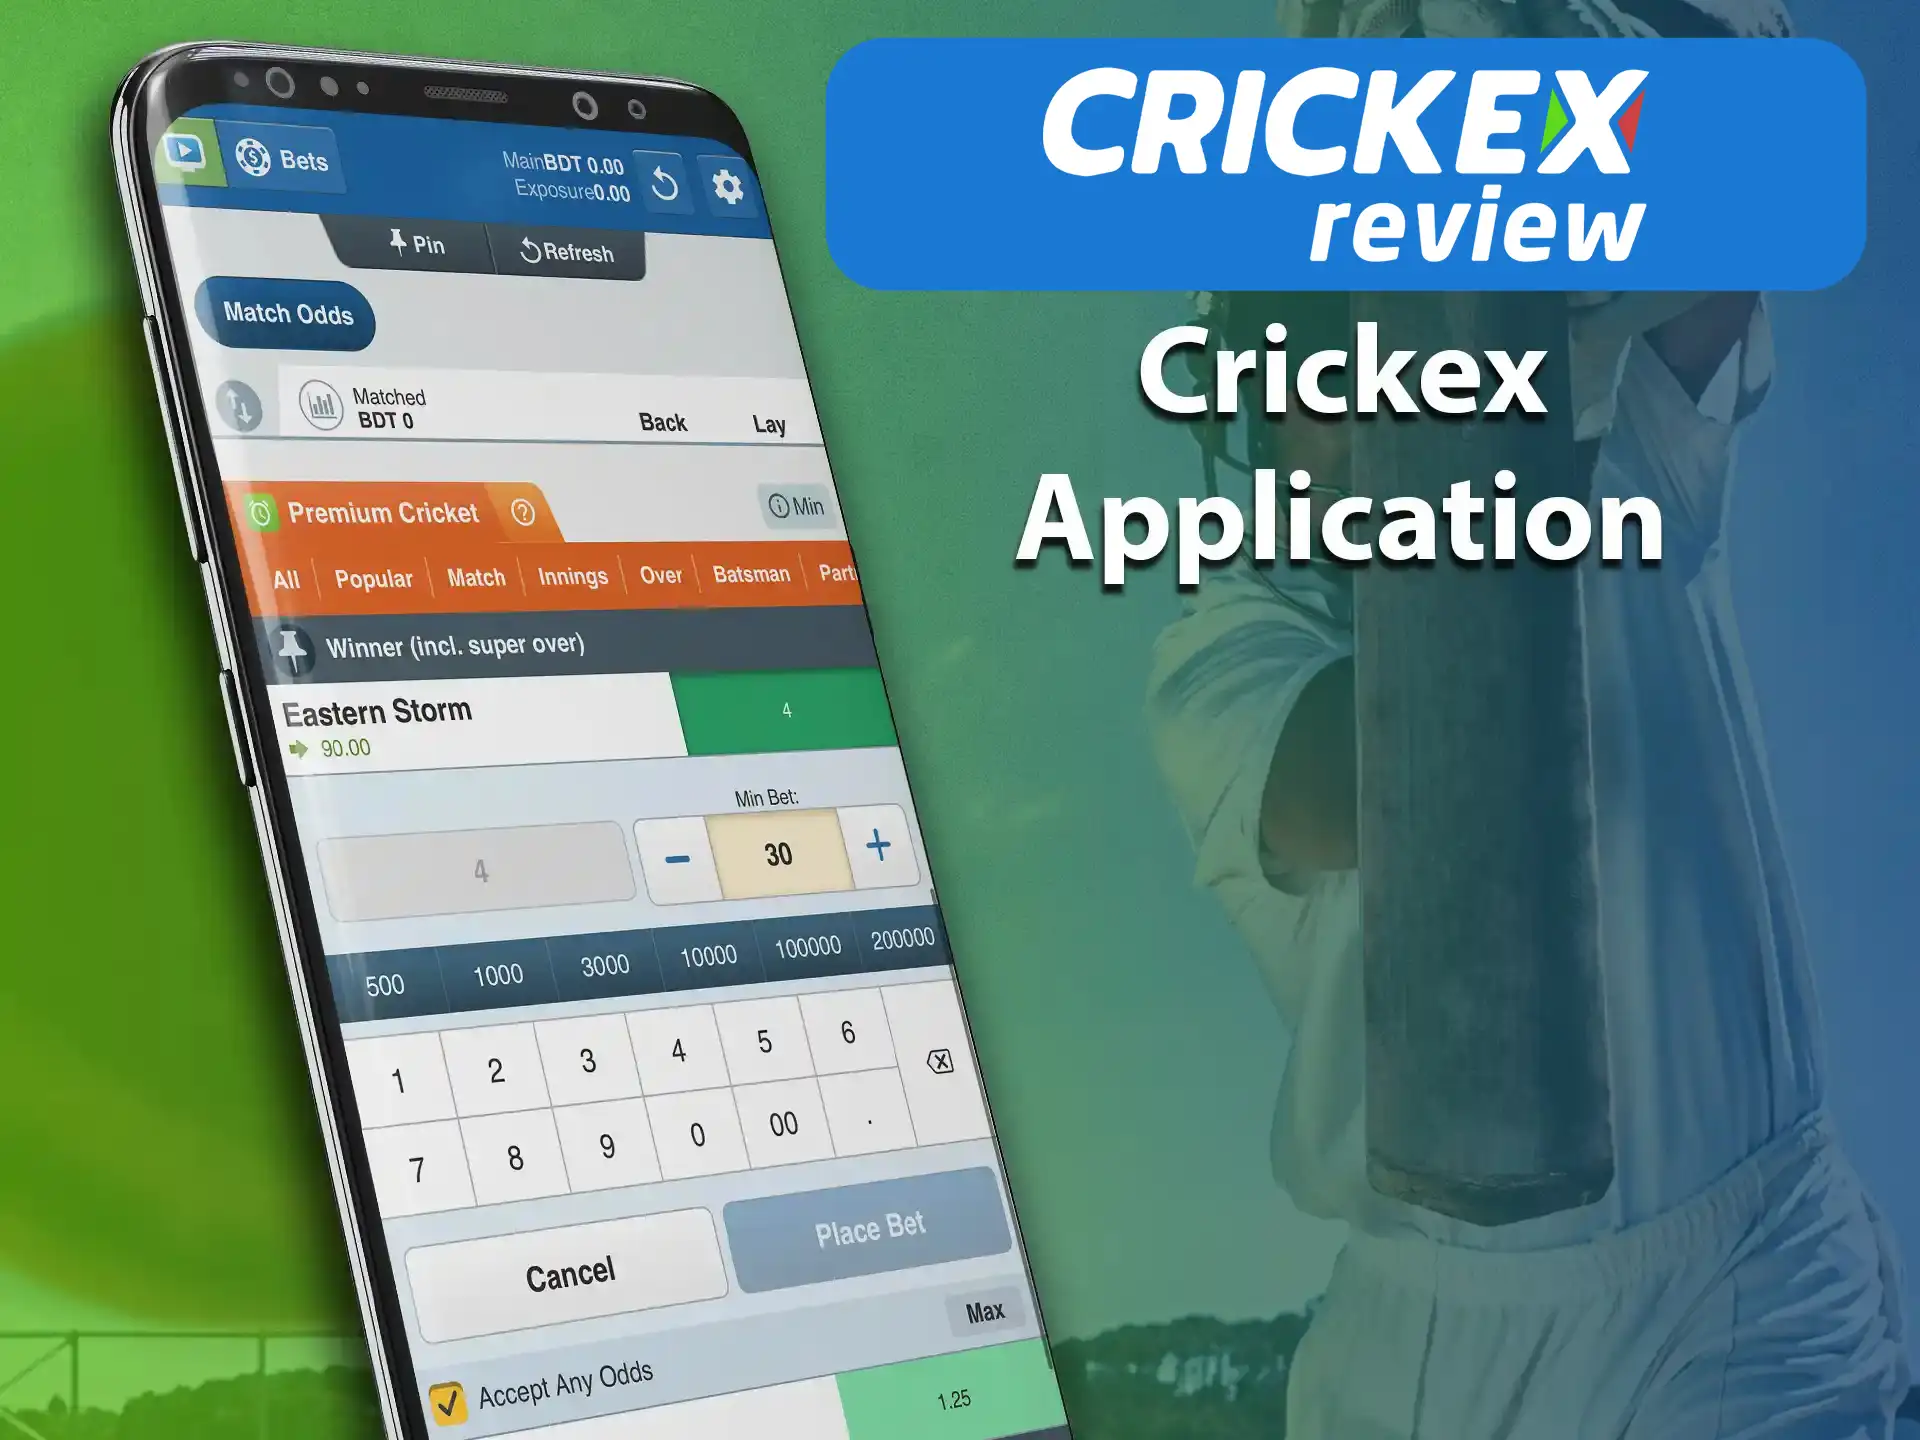 Using the instructions you can figure out how to download the Crickex app and make your first bet.